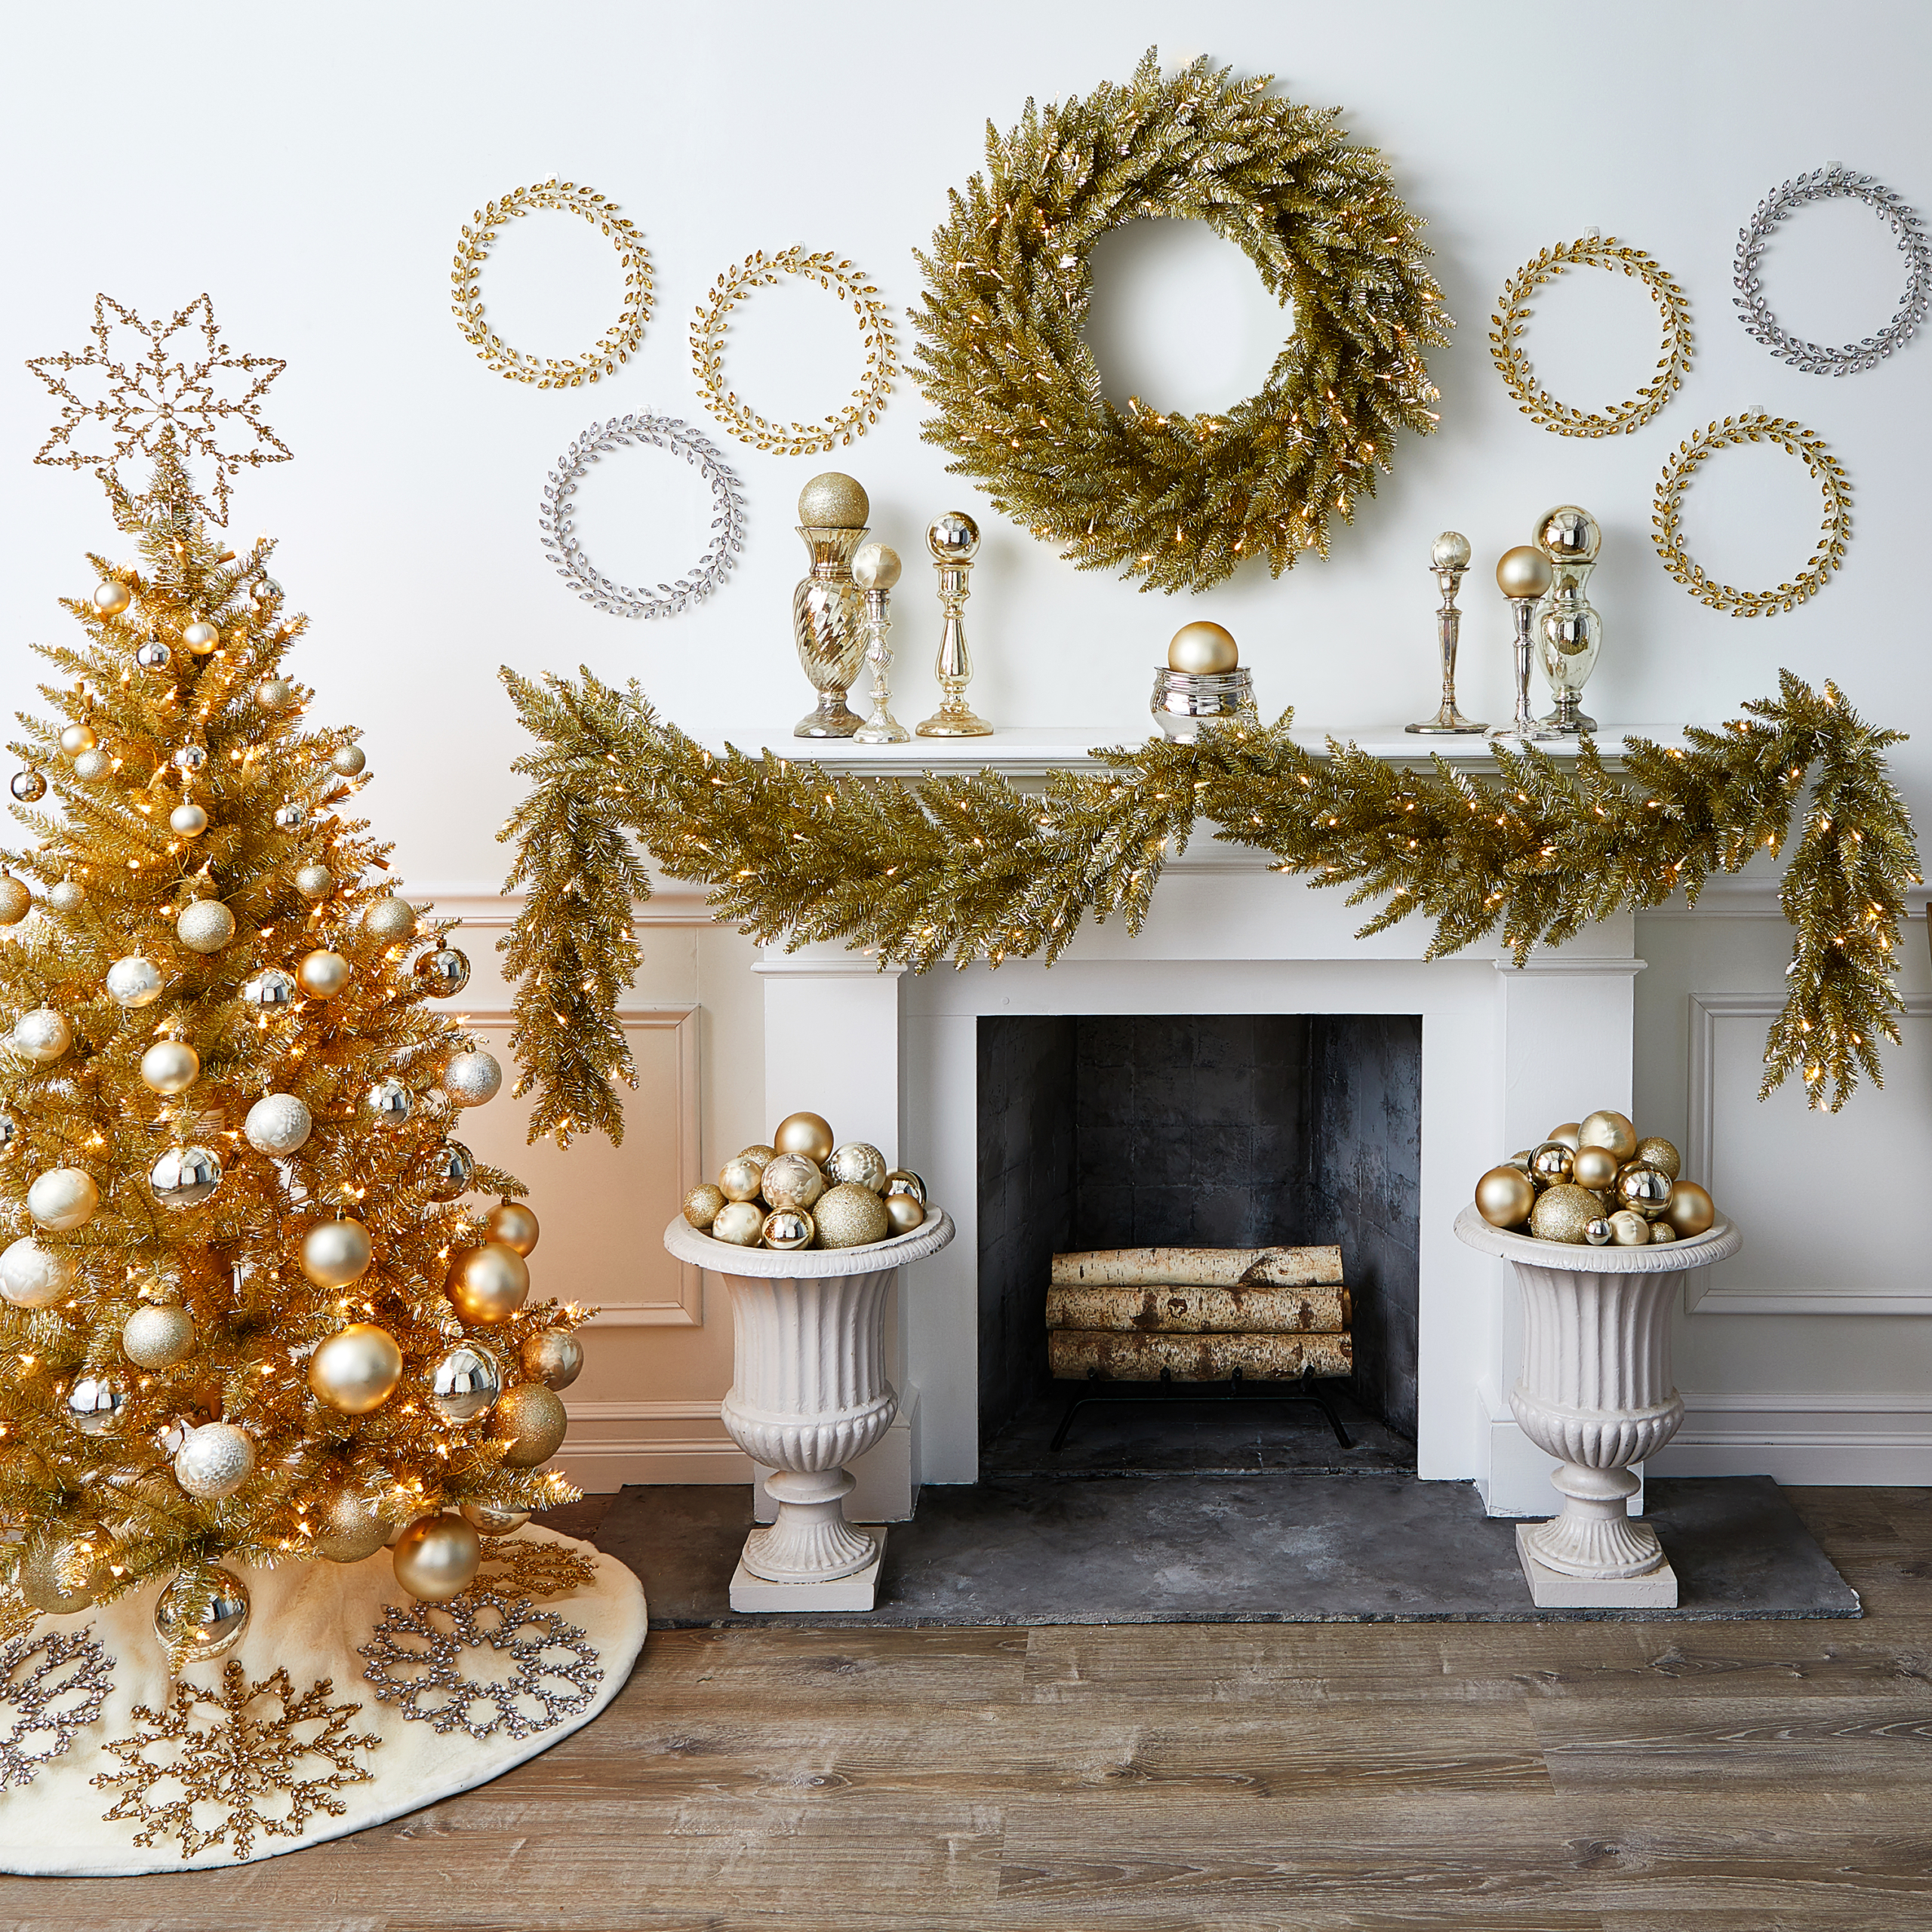 https://static.themarthablog.com/2022/12/champagne-tinsel-wreath-garland-tree-015_Square-scaled.jpg